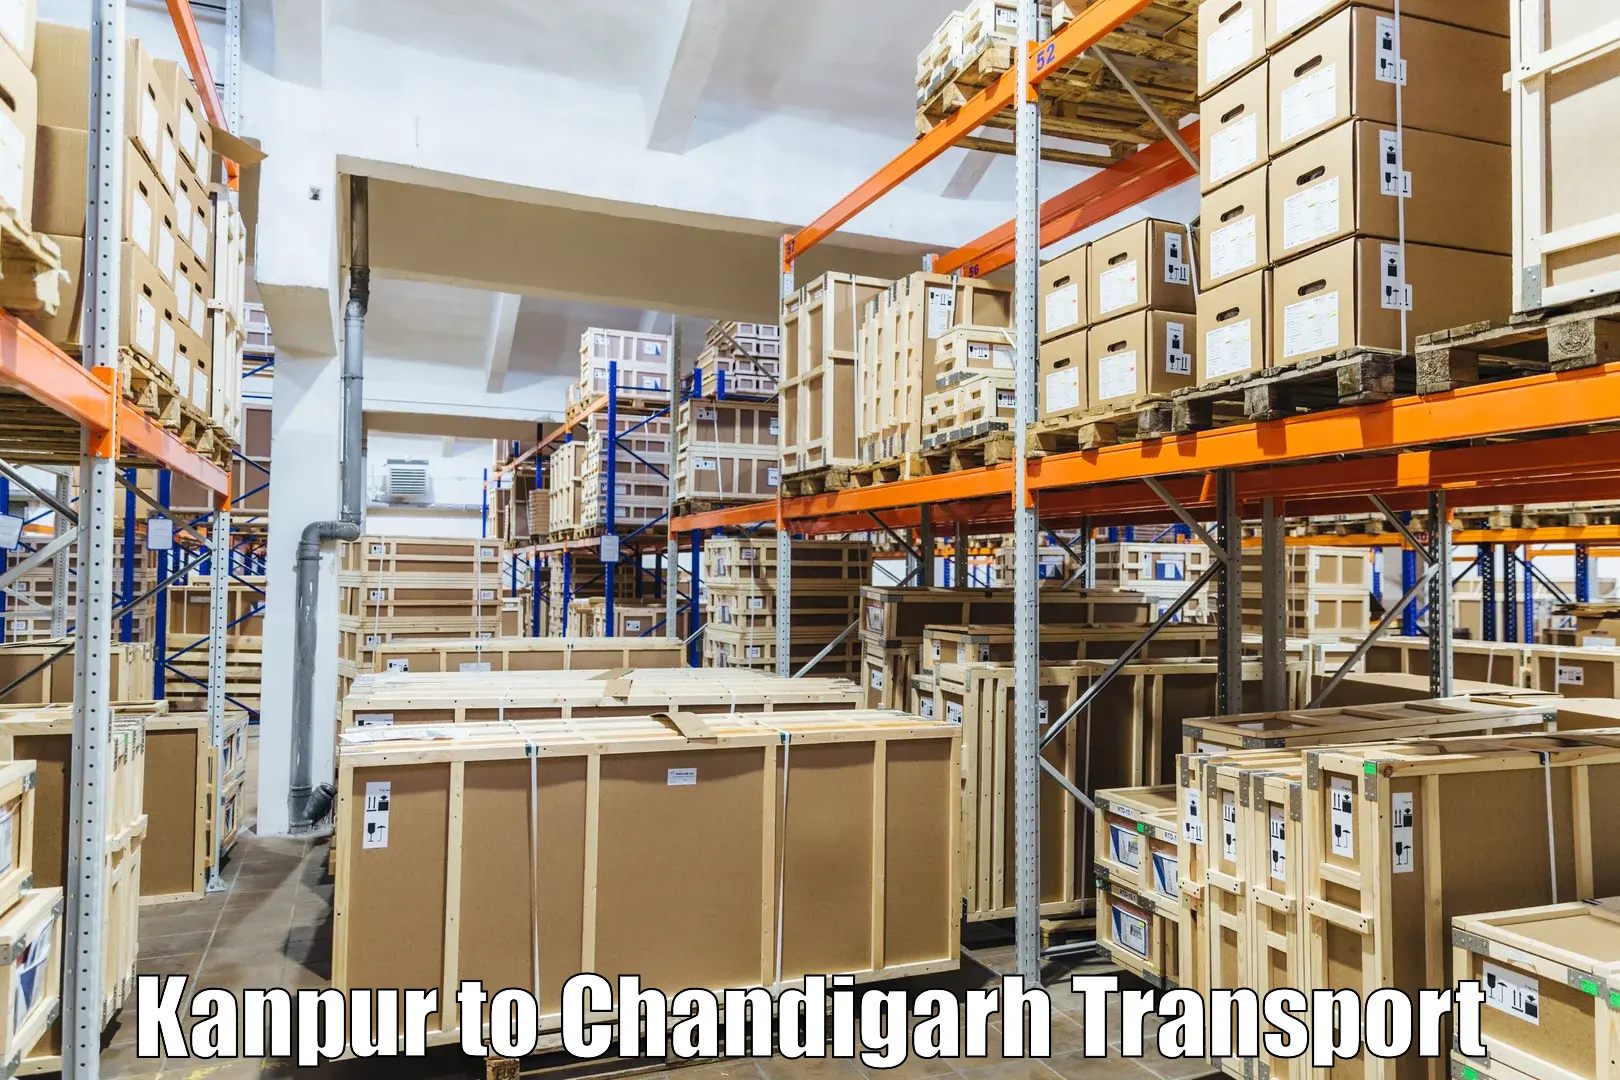 Road transport online services Kanpur to Chandigarh